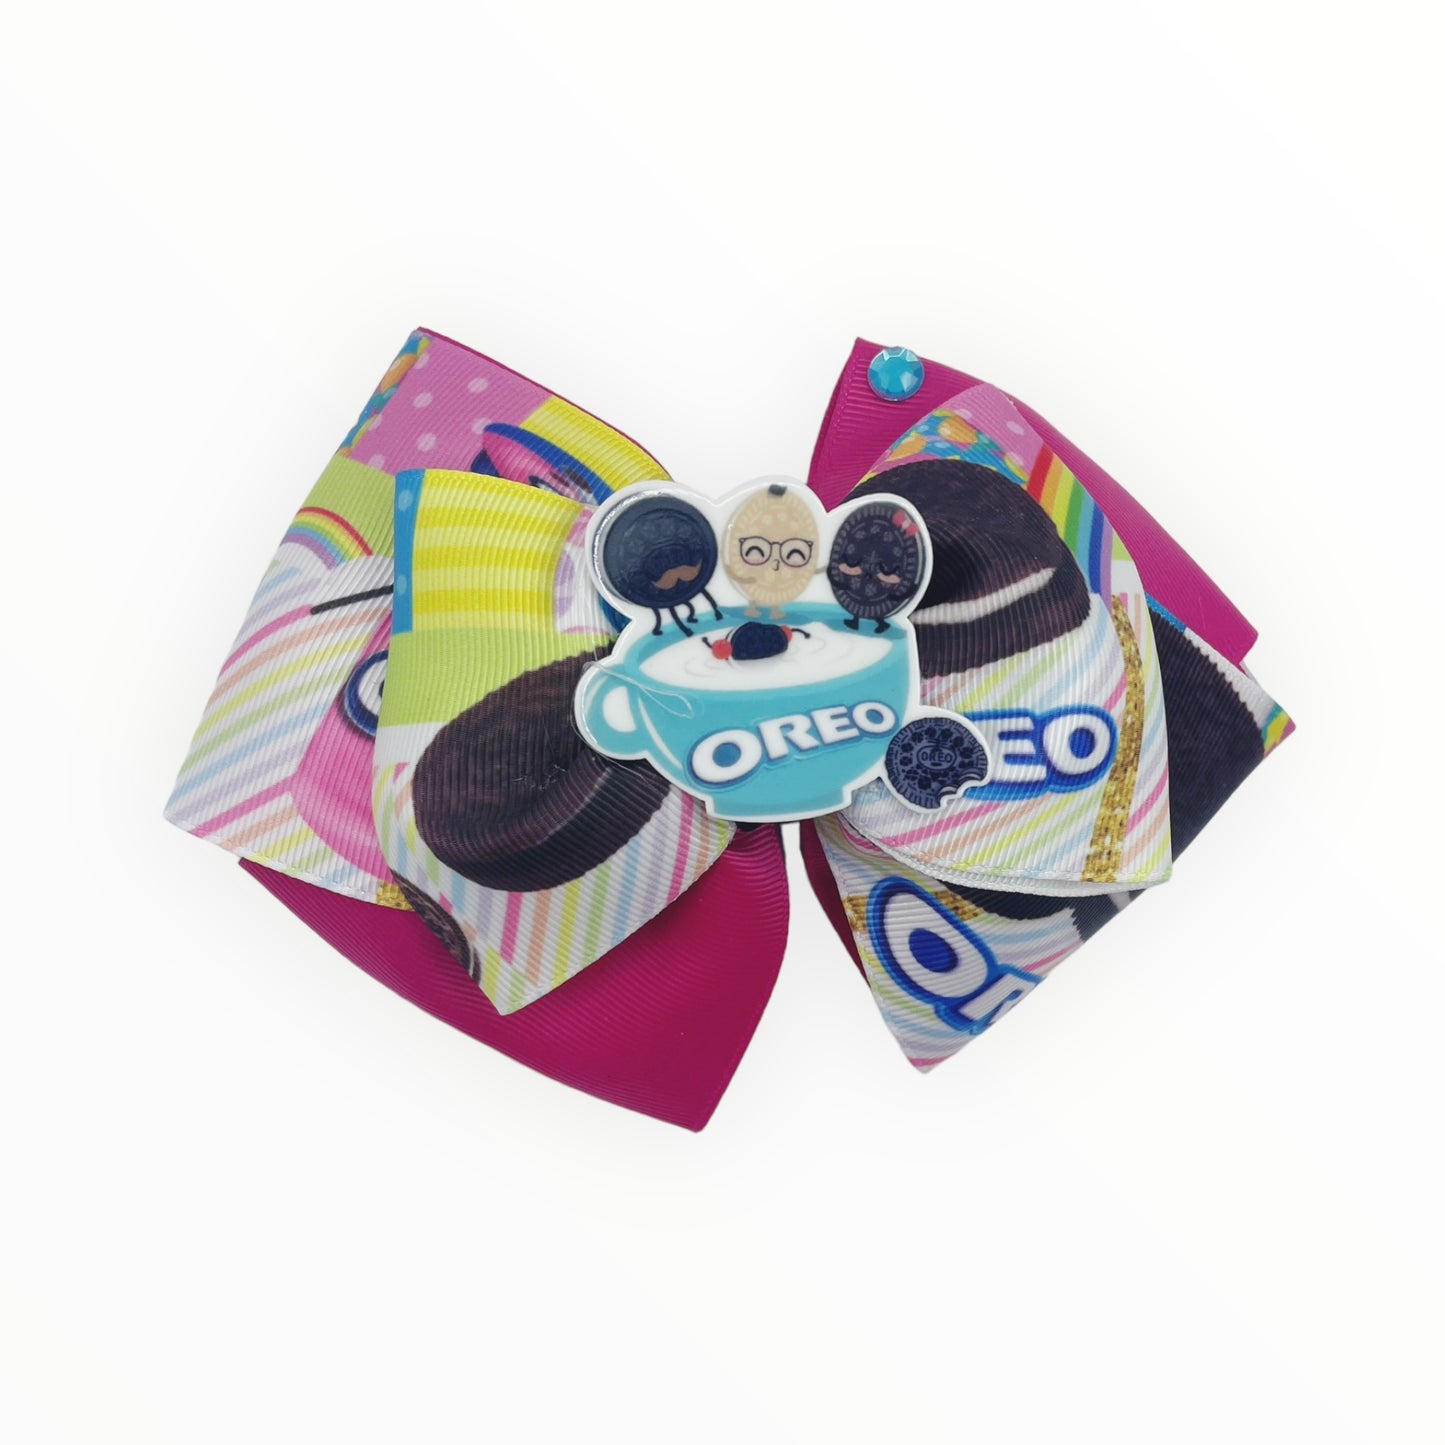 Cute Girls Bow For Hair Alligator Hair Clip For Girl Adorable Bow For Girls Inspired in Cookies Oreo